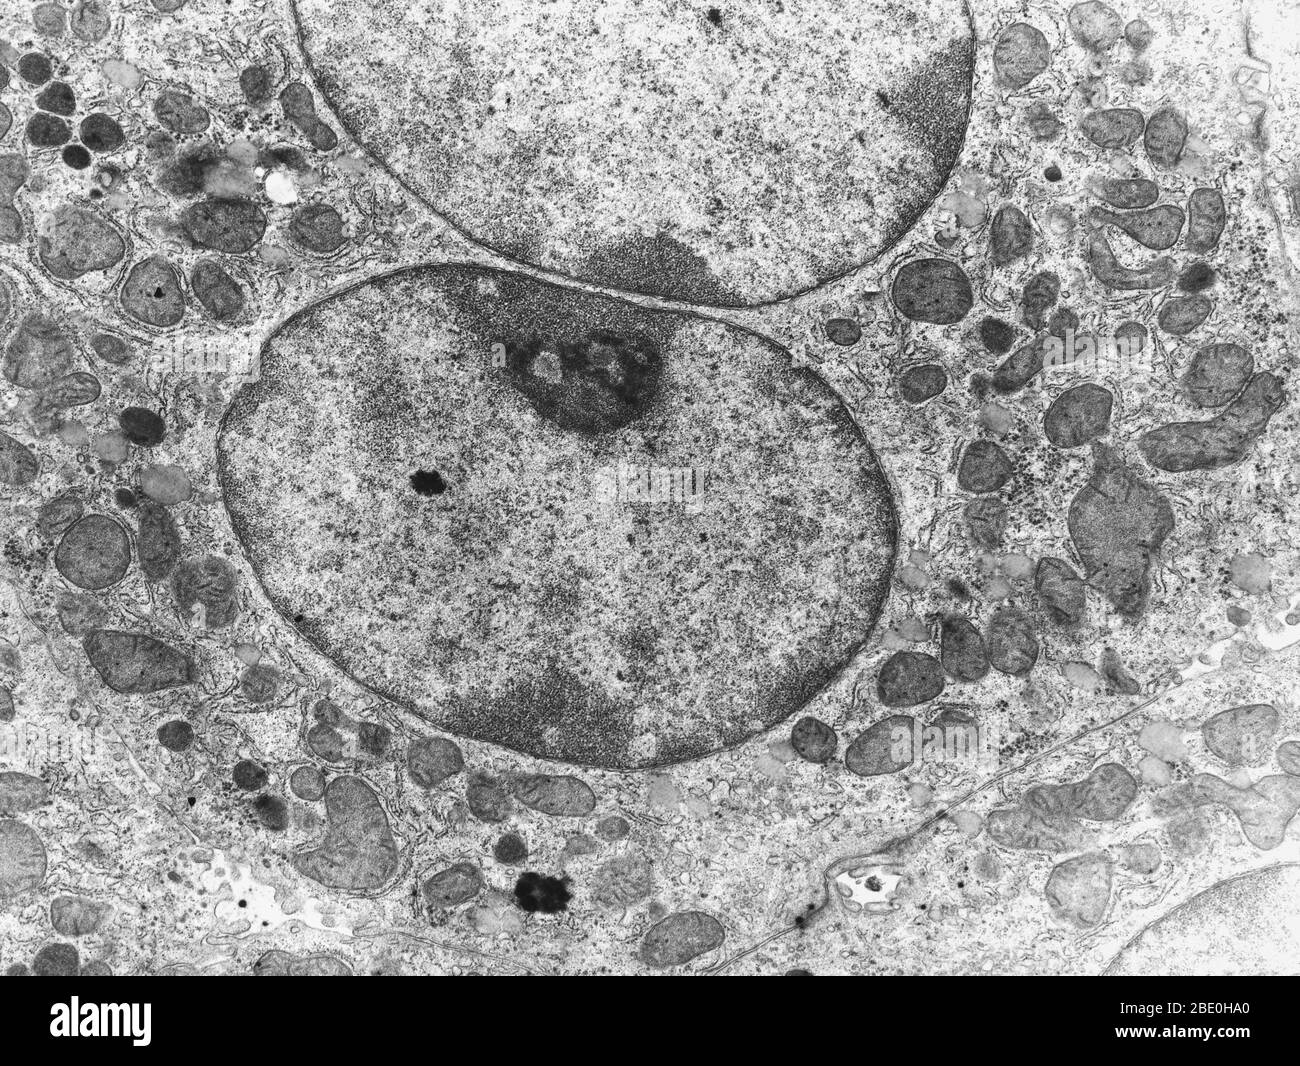 Transmission Electron Micrograph (TEM) of a cell, showing the organelles. Magnification unknown. Stock Photo